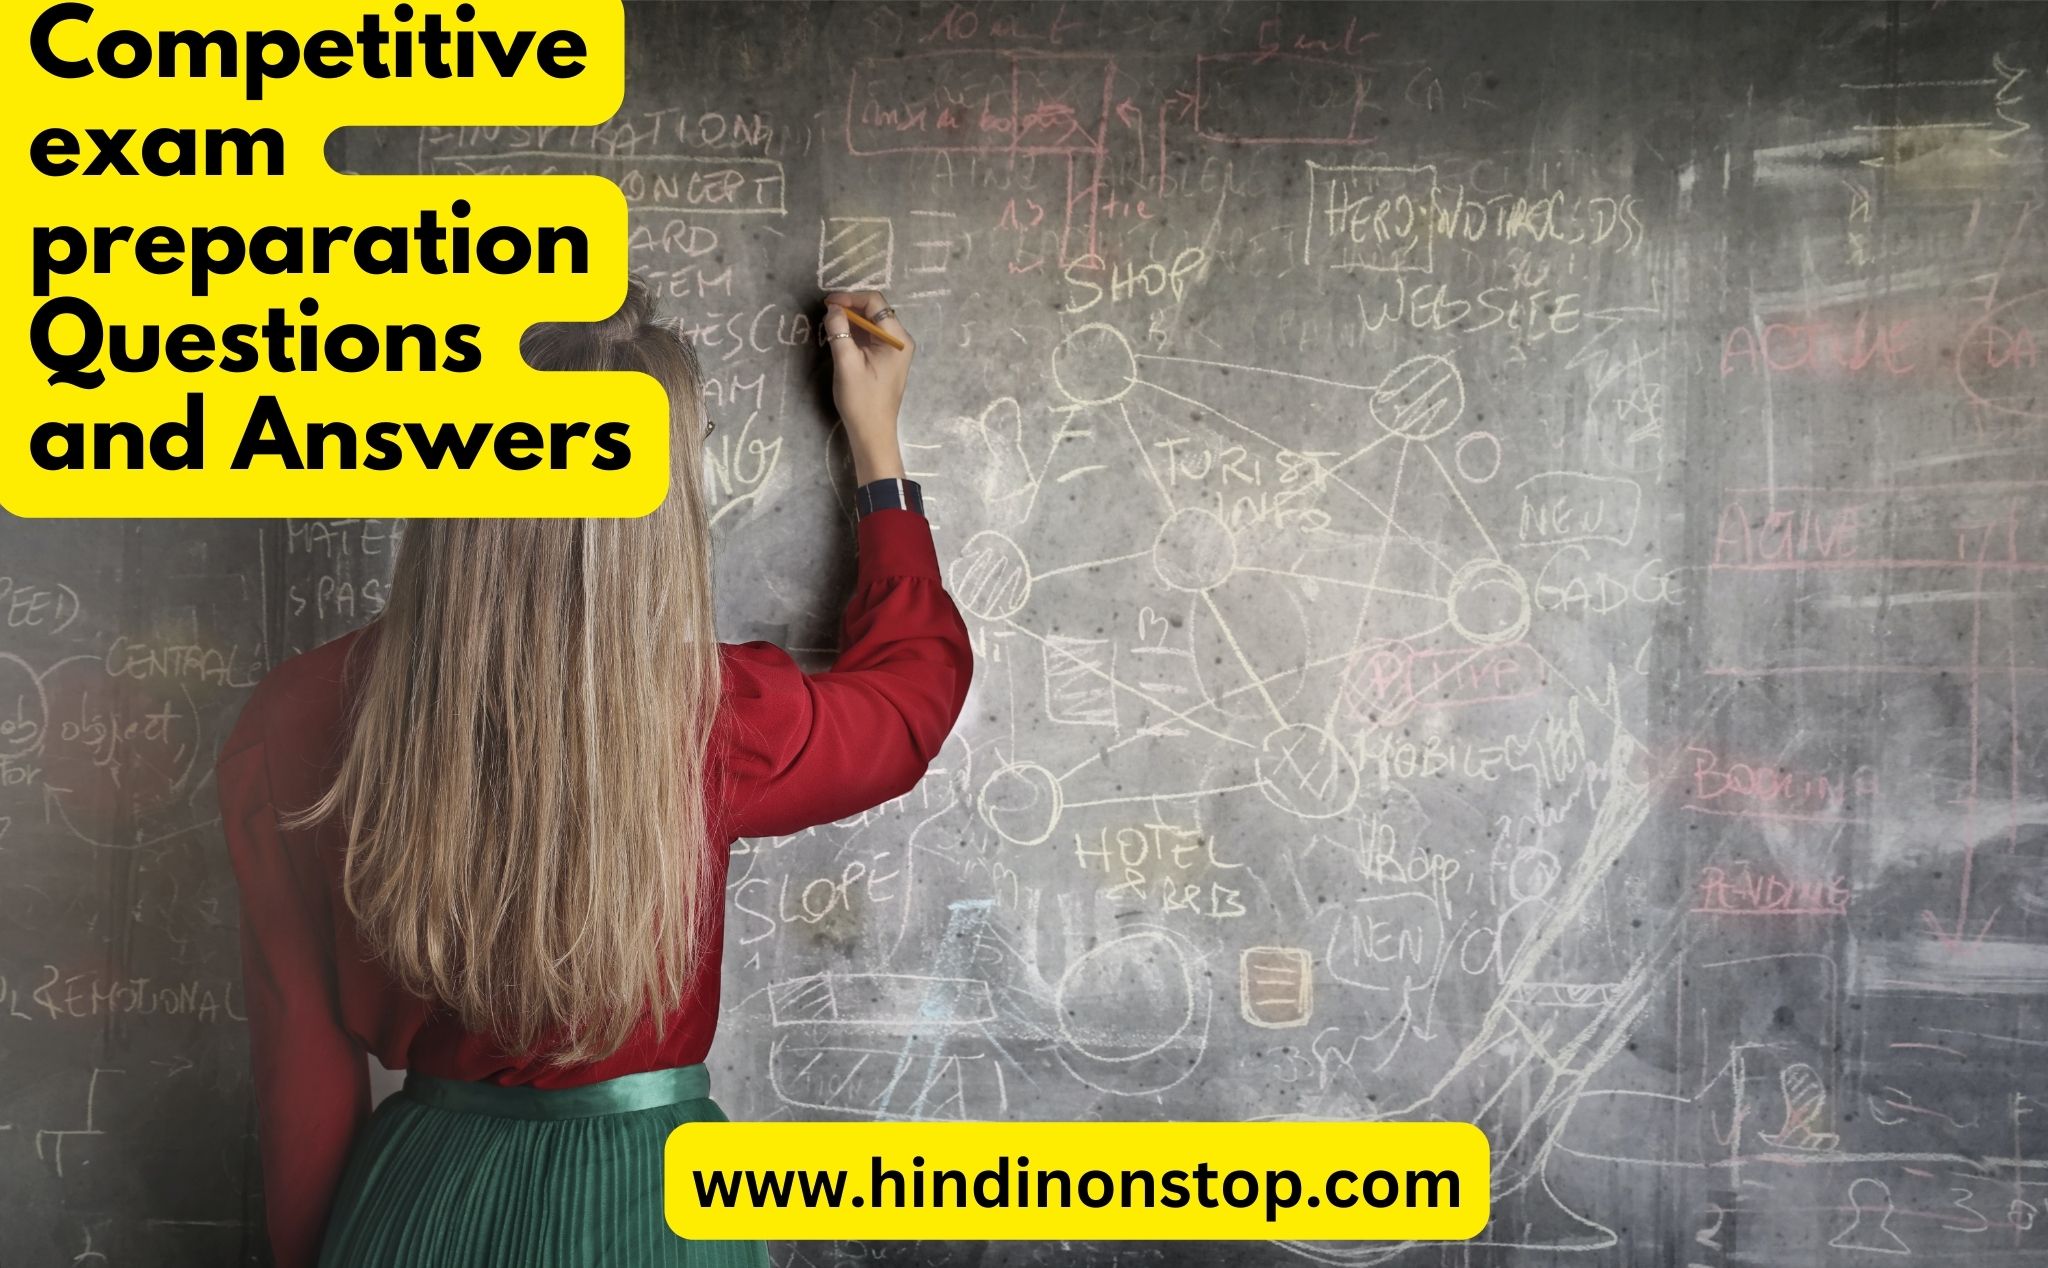 General knowledge for competitive exam in Hindi - Part 1